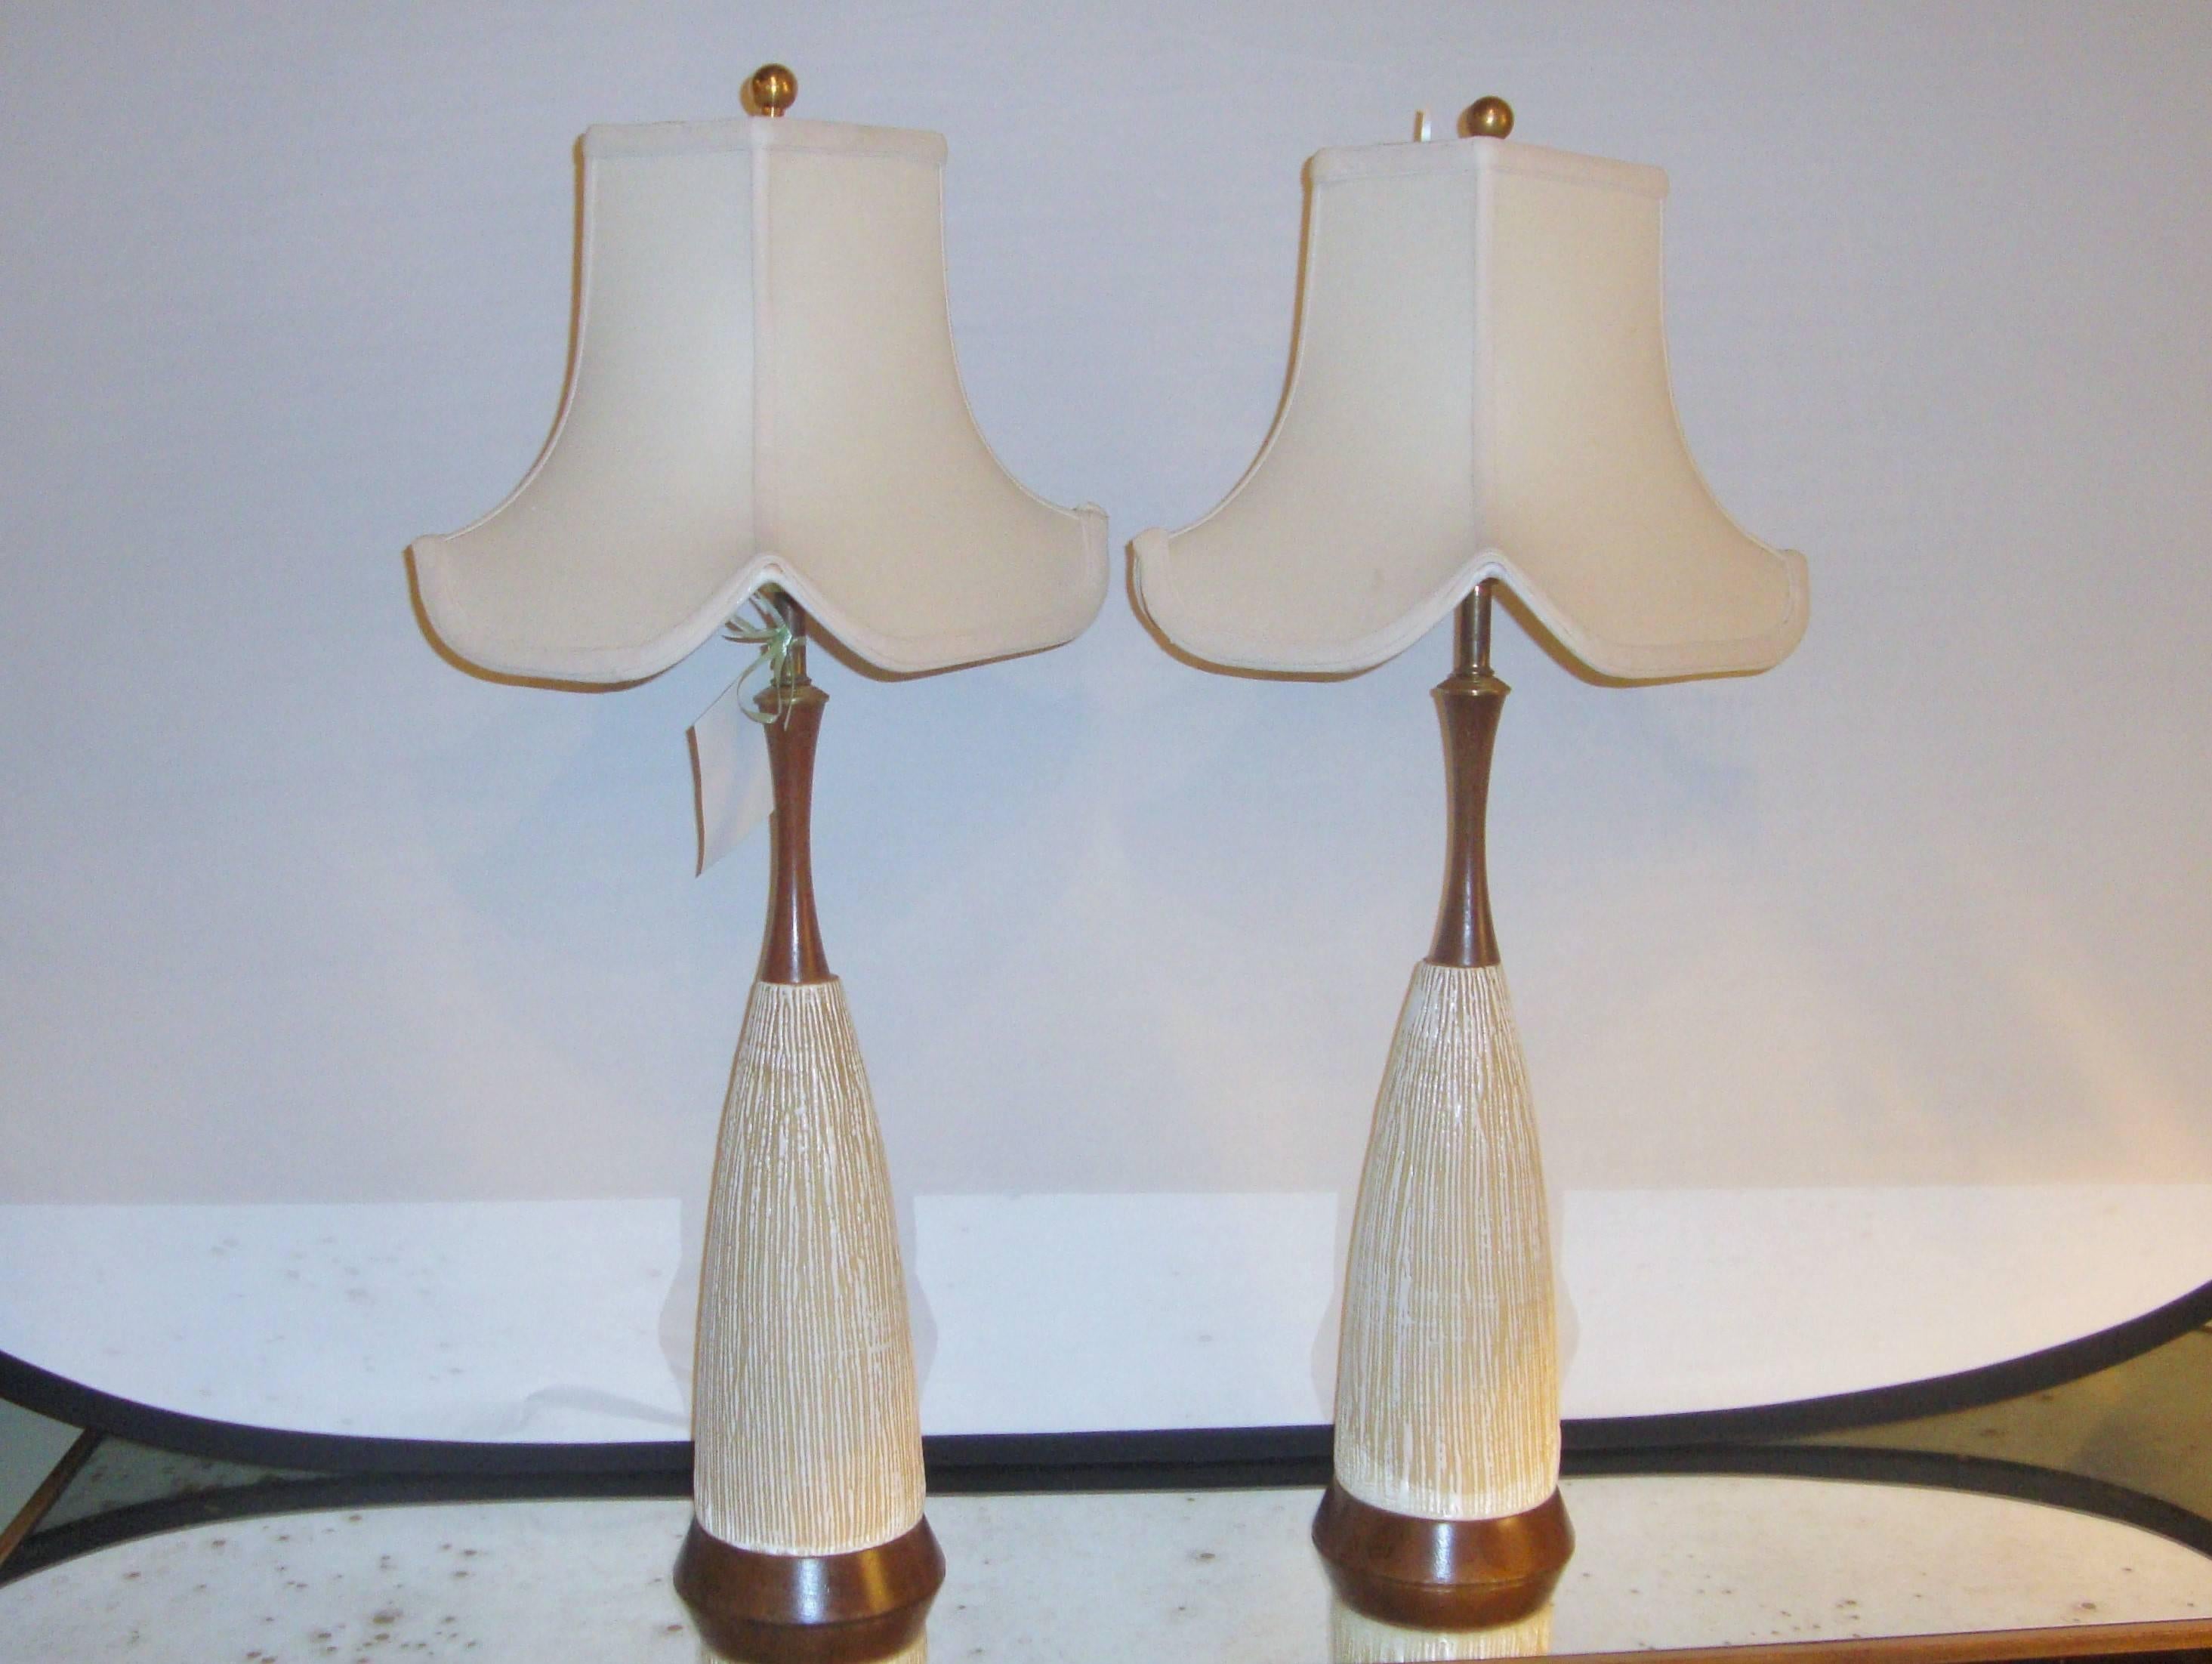 A beautiful pair of Art Deco style lamps in an off-white cream color. The lamp’s base has a grain texture and look, would look perfect in any living room, bedroom, or office.
Linen bell lampshade.
    